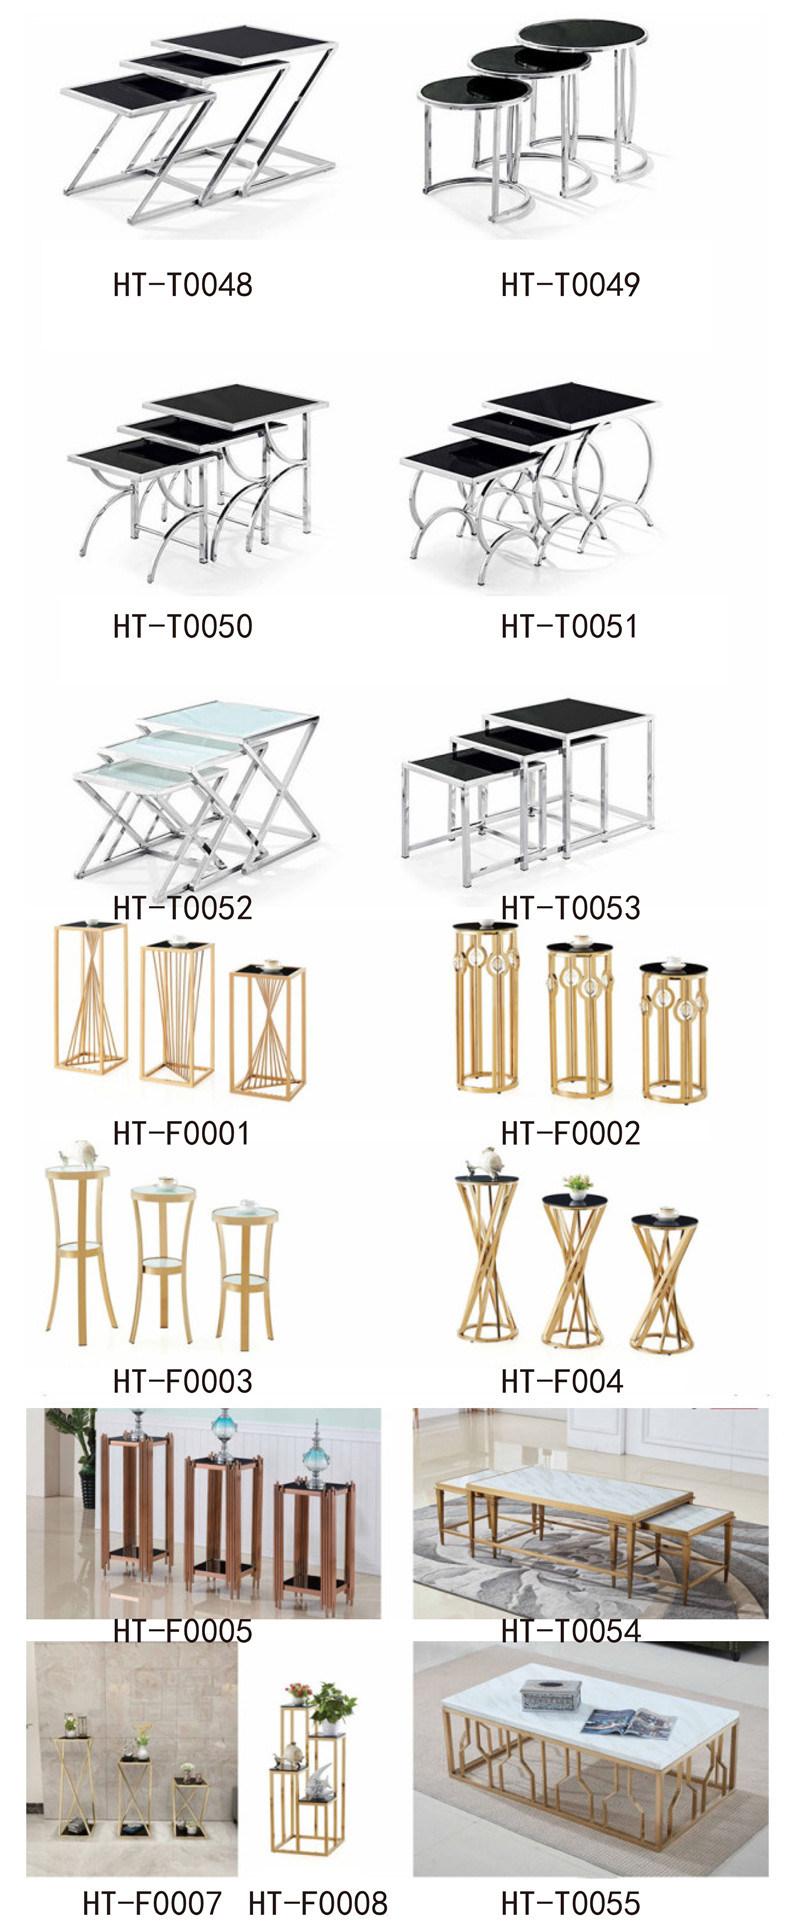 Factory Modern Restaurant Home Furniture White Marble Dining Table 8-Seat 16-Person Table Chair Set S Shape Piece Together Banquet Table